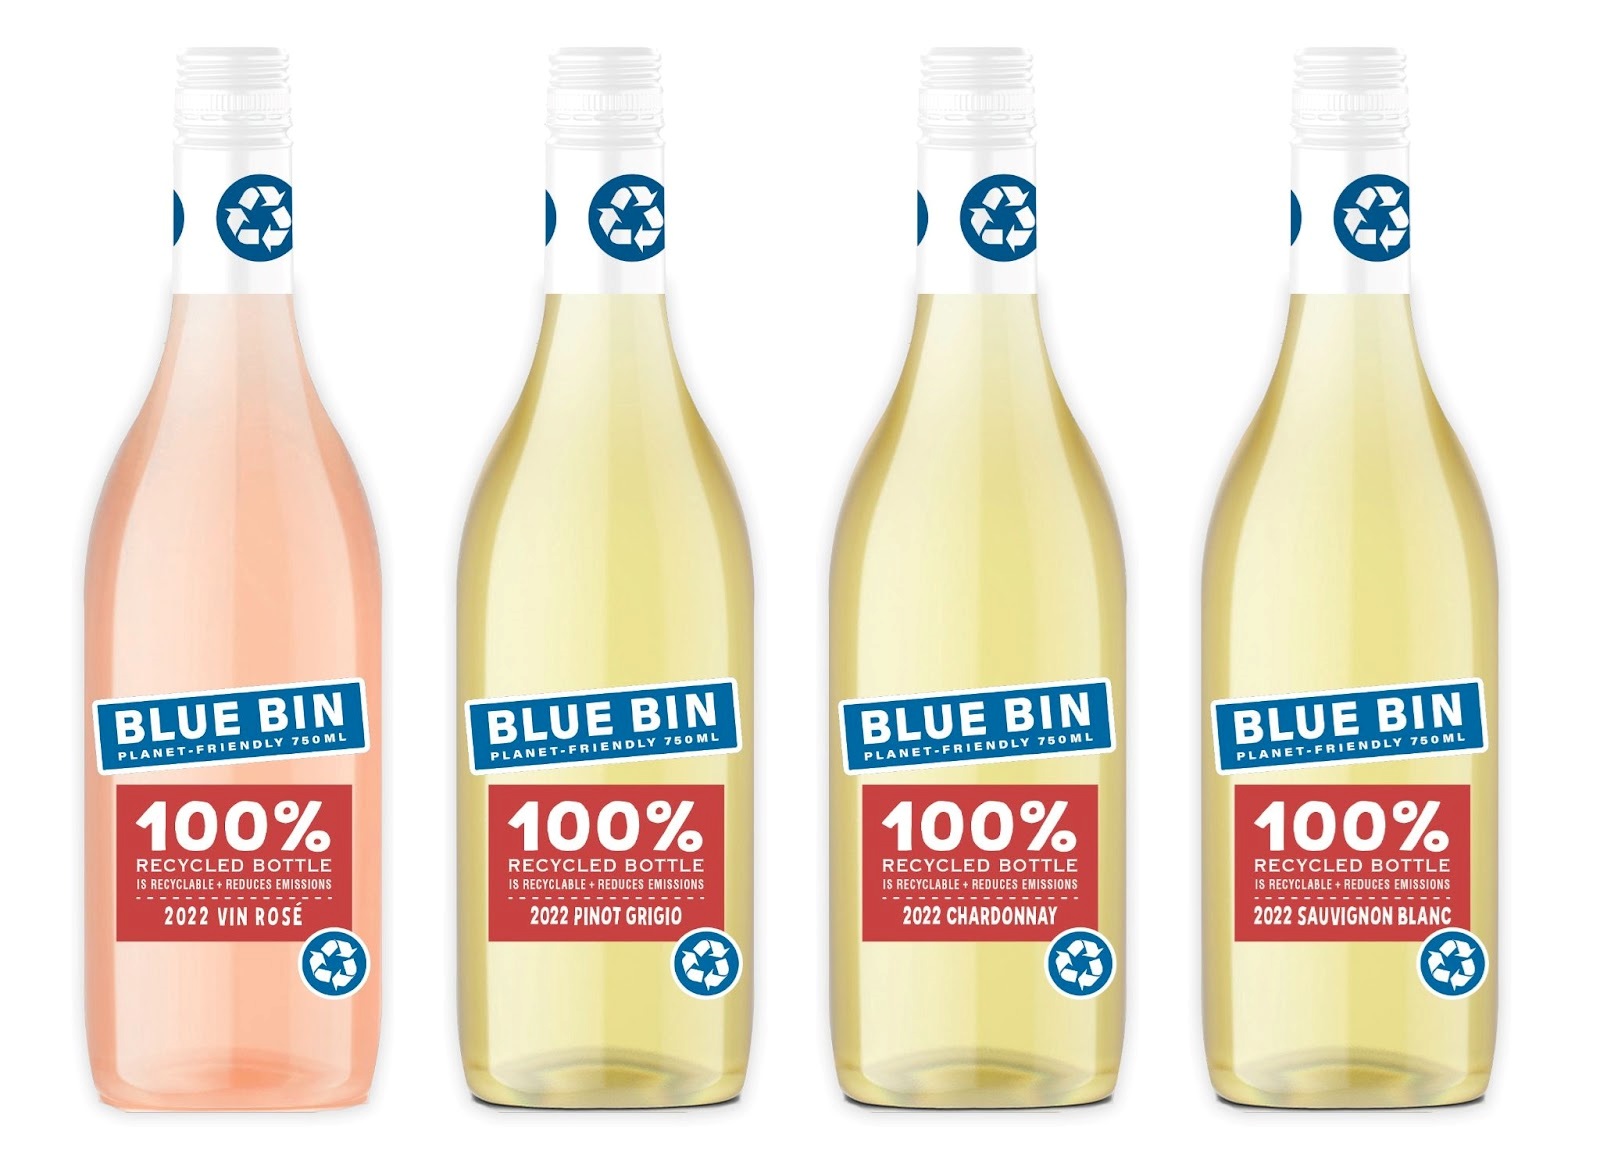 https://www.beveragedaily.com/var/wrbm_gb_food_pharma/storage/images/publications/food-beverage-nutrition/beveragedaily.com/article/2023/09/27/designed-to-be-recycled-blue-bin-s-plastic-wine-bottle-wants-to-create-easily-recyclable-alternative-to-glass-bottles/16562279-2-eng-GB/Designed-to-be-recycled-Blue-Bin-s-plastic-wine-bottle-wants-to-create-easily-recyclable-alternative-to-glass-bottles.jpg